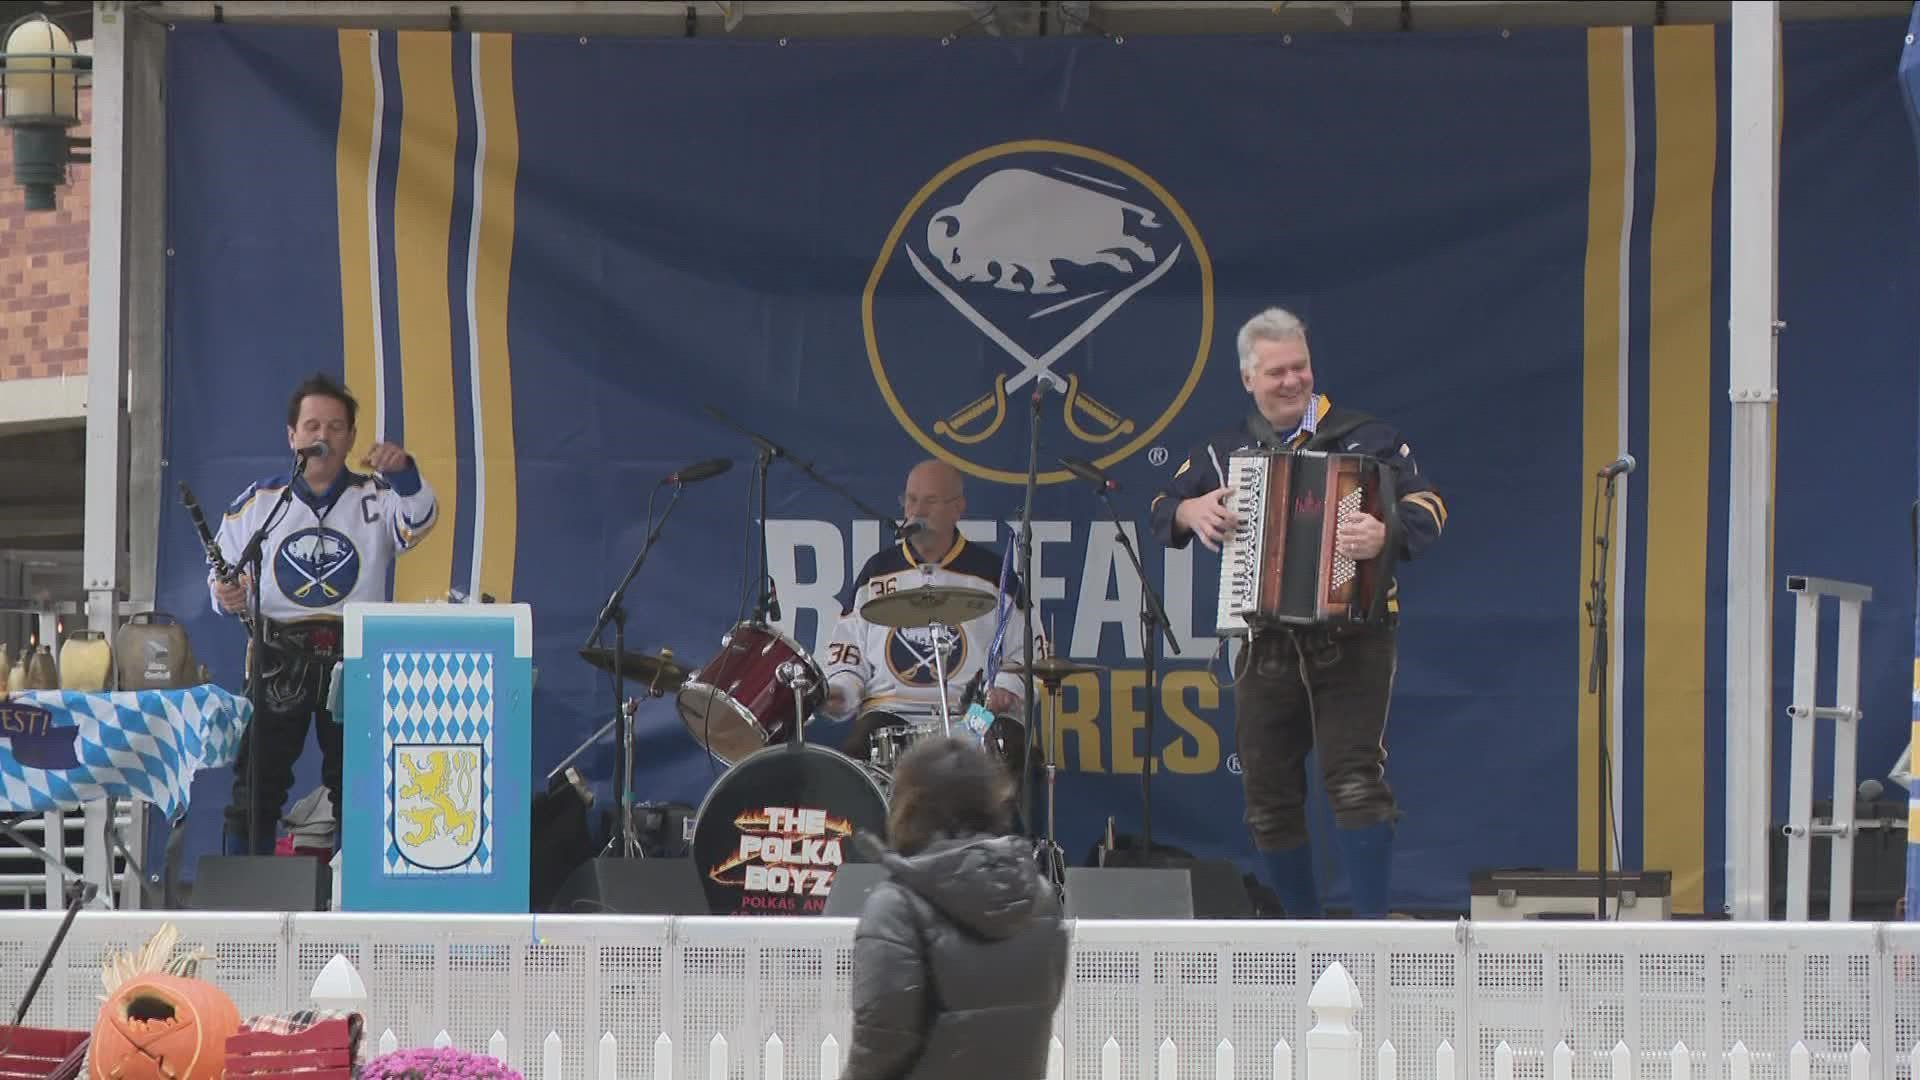 A Party in the Plaza for the Sabres